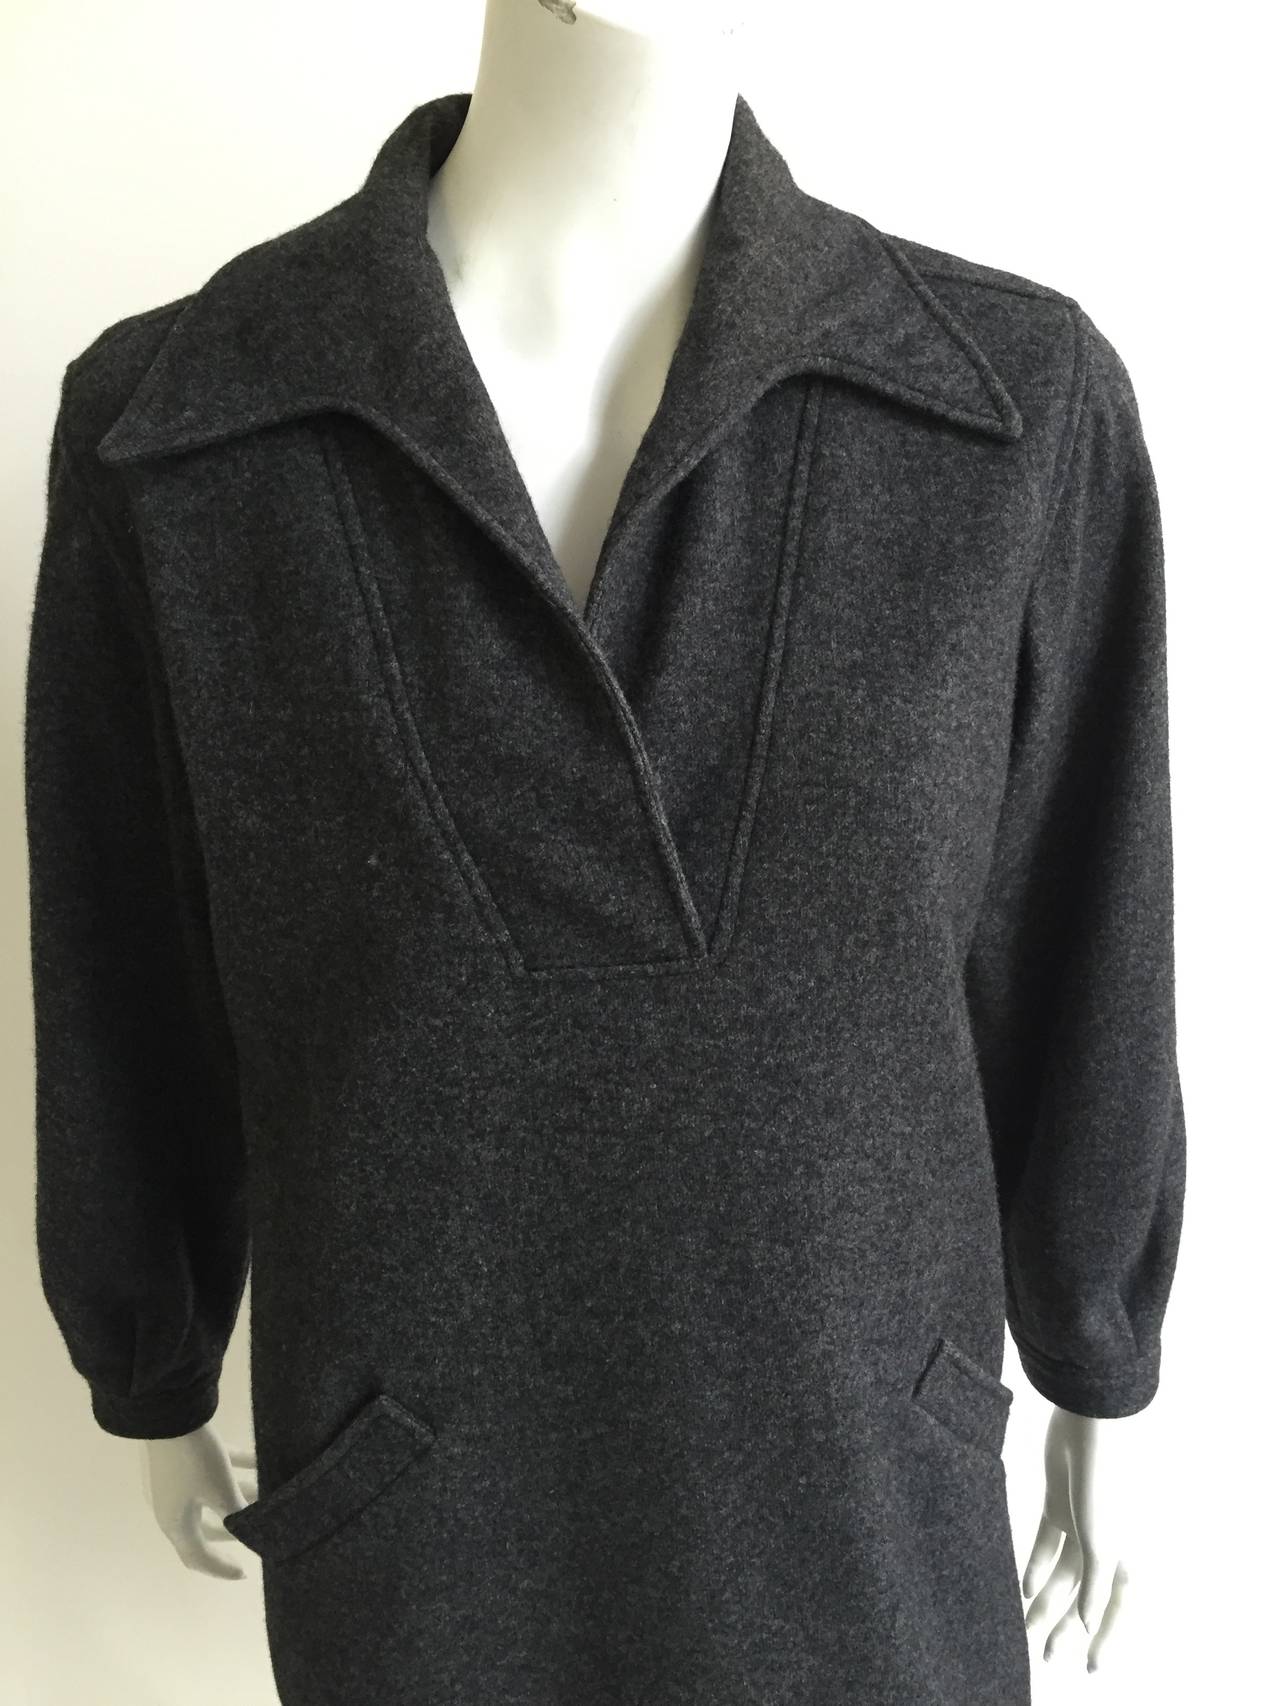 Black Halston 1970s Gray Wool Dress with Pockets size 6/8. For Sale